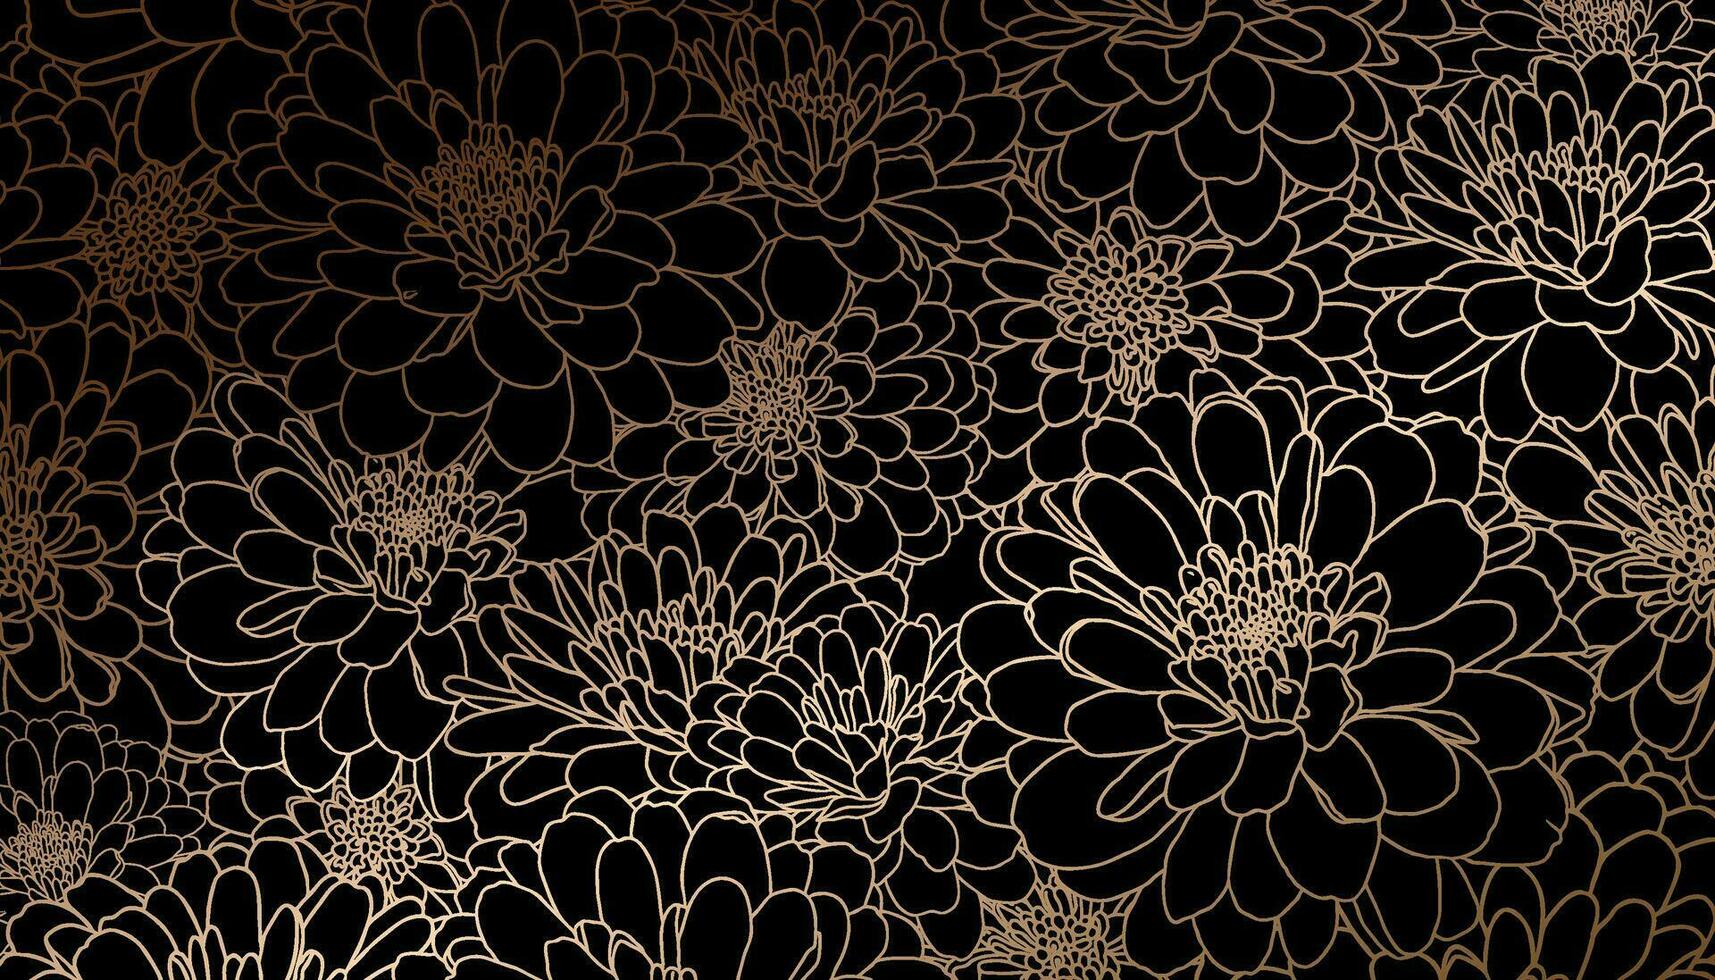 Golden chrysanthemum flowers in hand drawn line art on black background. Decorative print for wallpapers, wrappings, wedding invitations, greetings, backdrops. vector